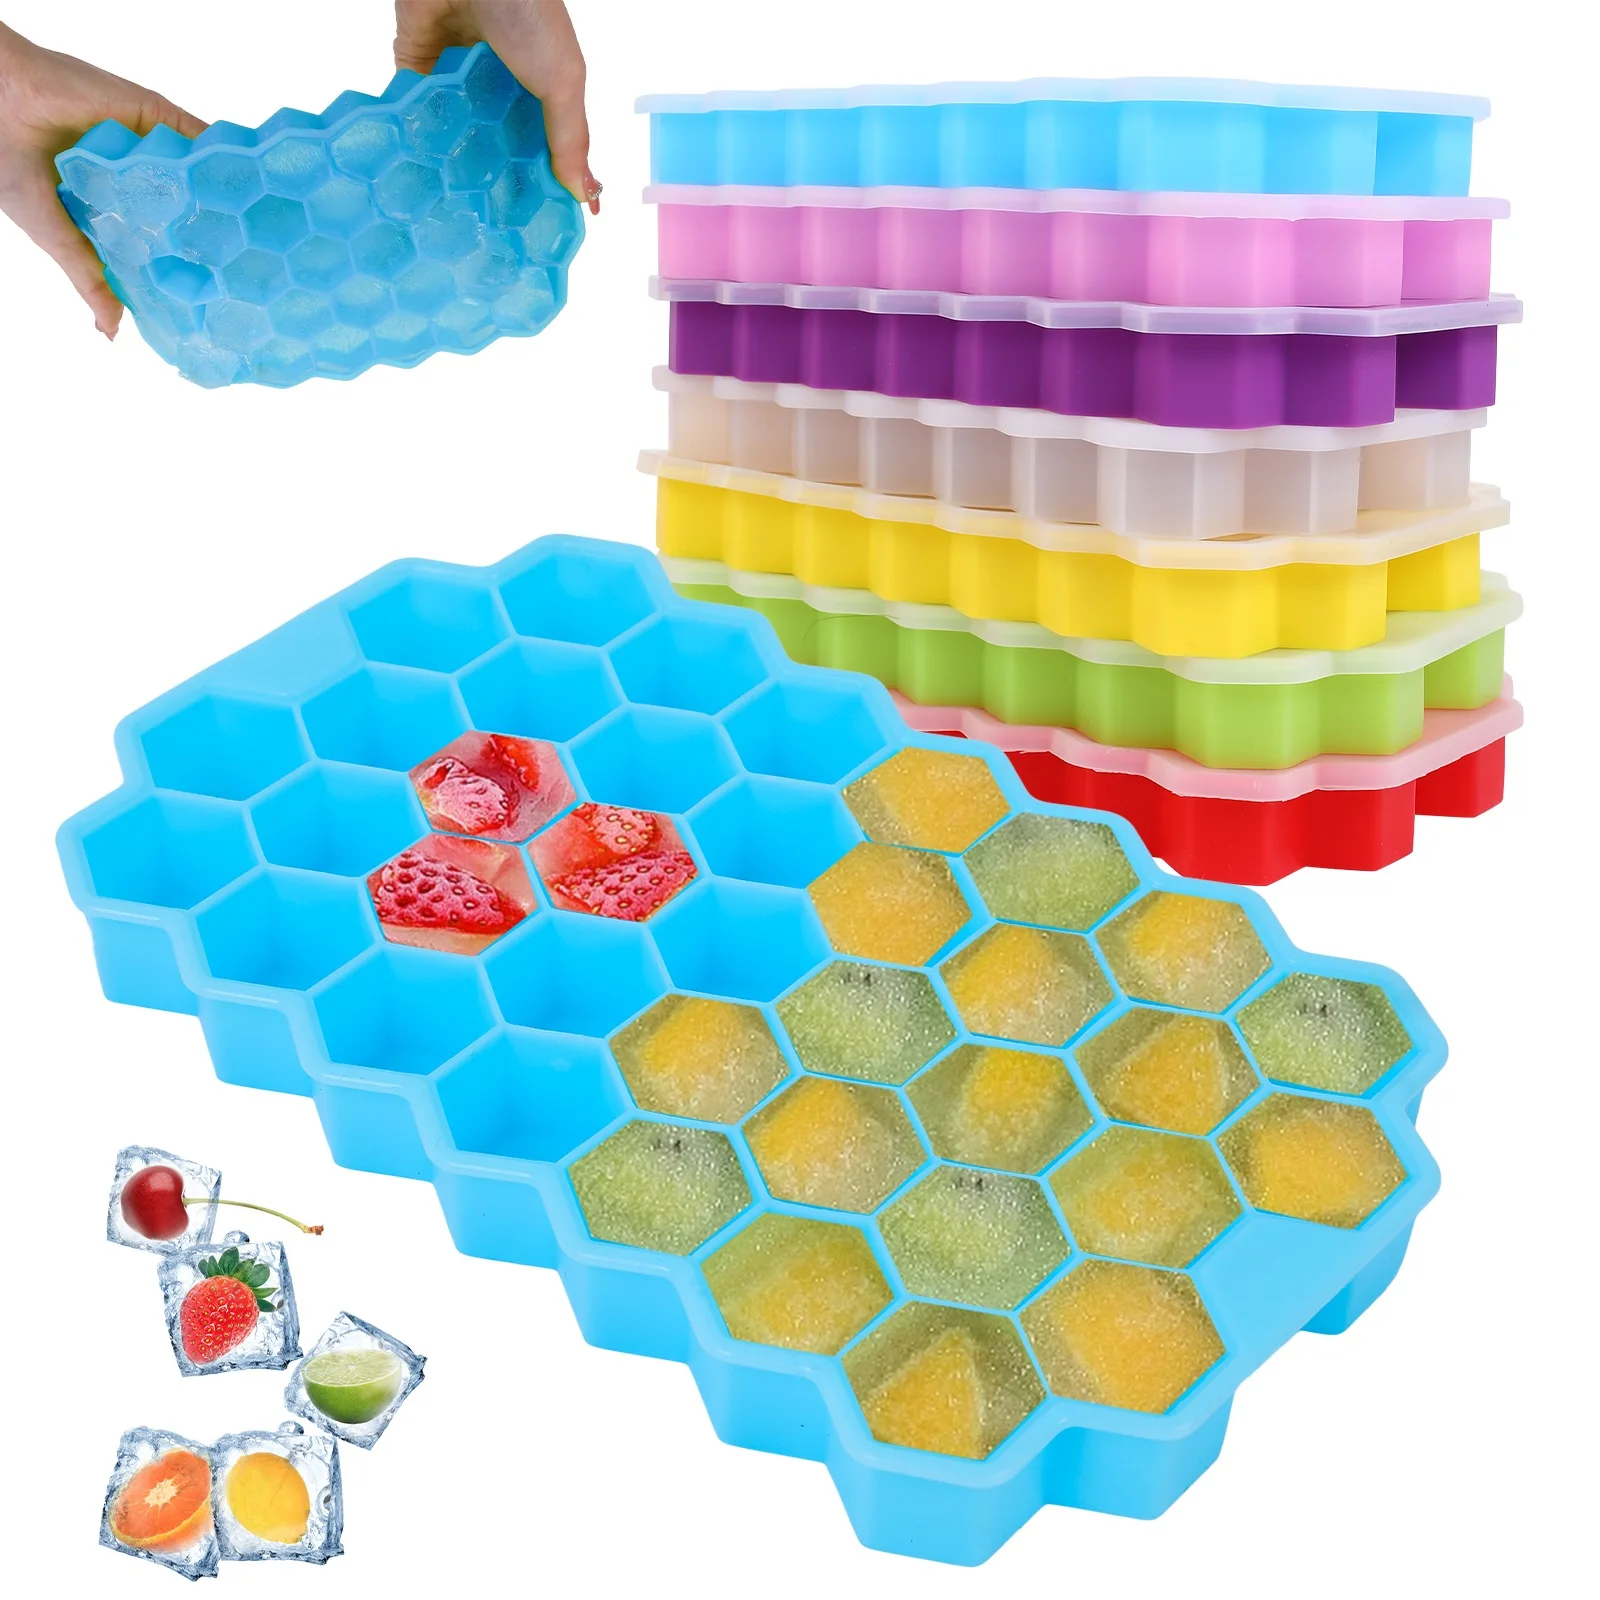 

37 Cavity Cube Maker Silicones Ice Mould Honeycomb Ice Cube Tray Magnum Silicone Mold Forms Food Grade Mold for Whiskey Cocktail